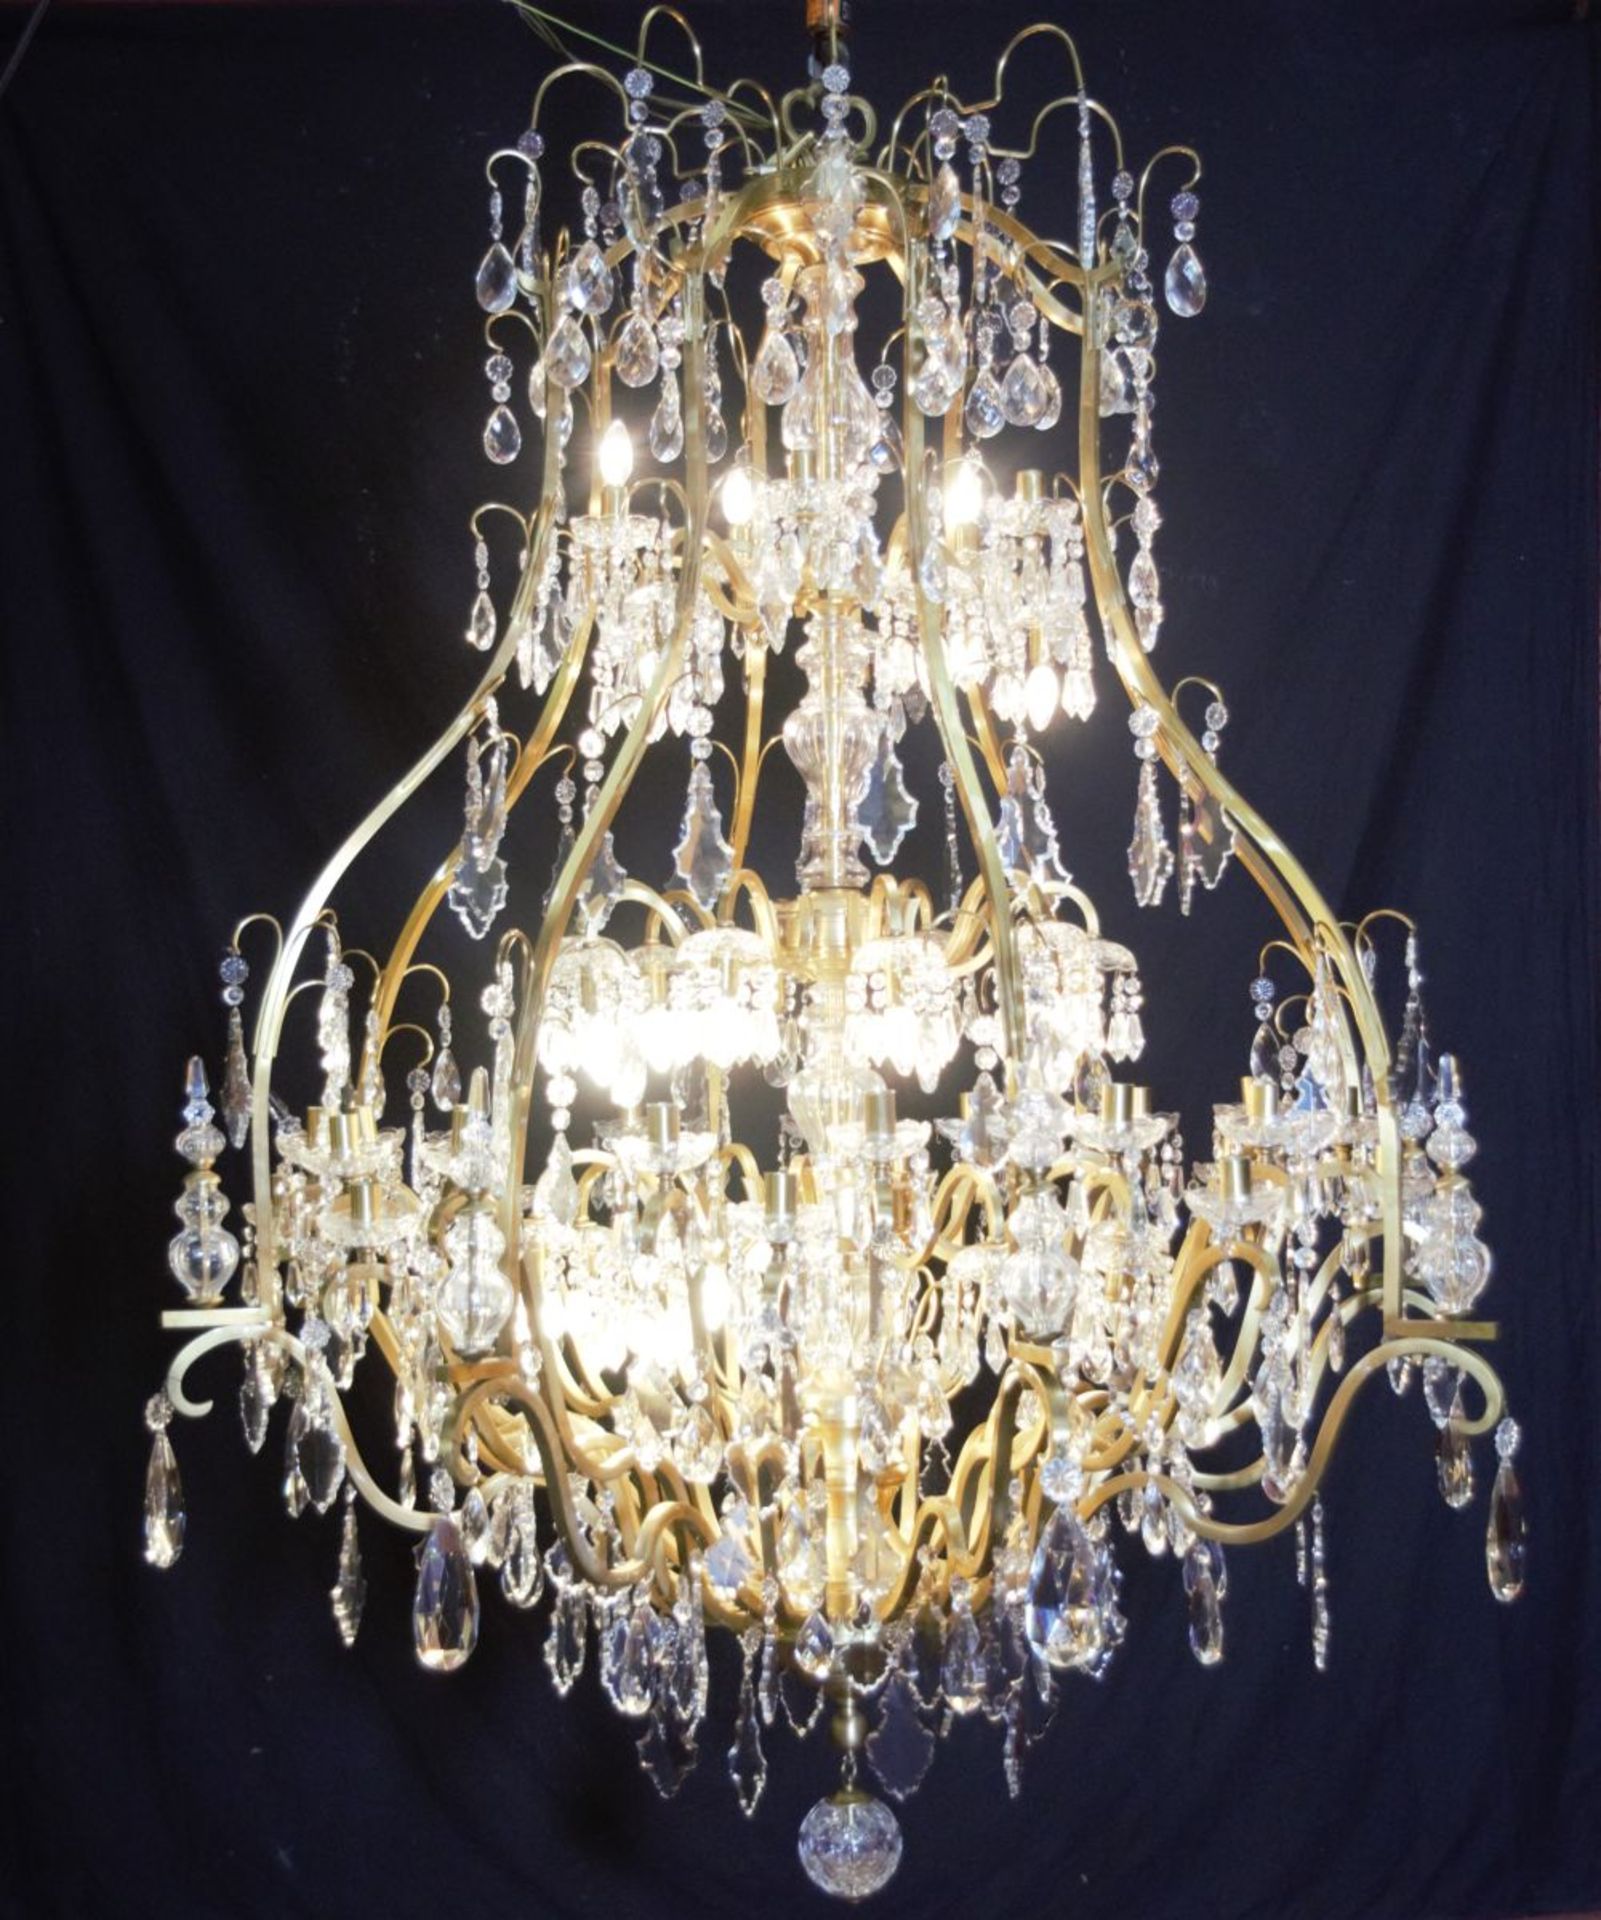 LARGE FRENCH BRASS & CRYSTAL CHANDELIER - Image 2 of 4